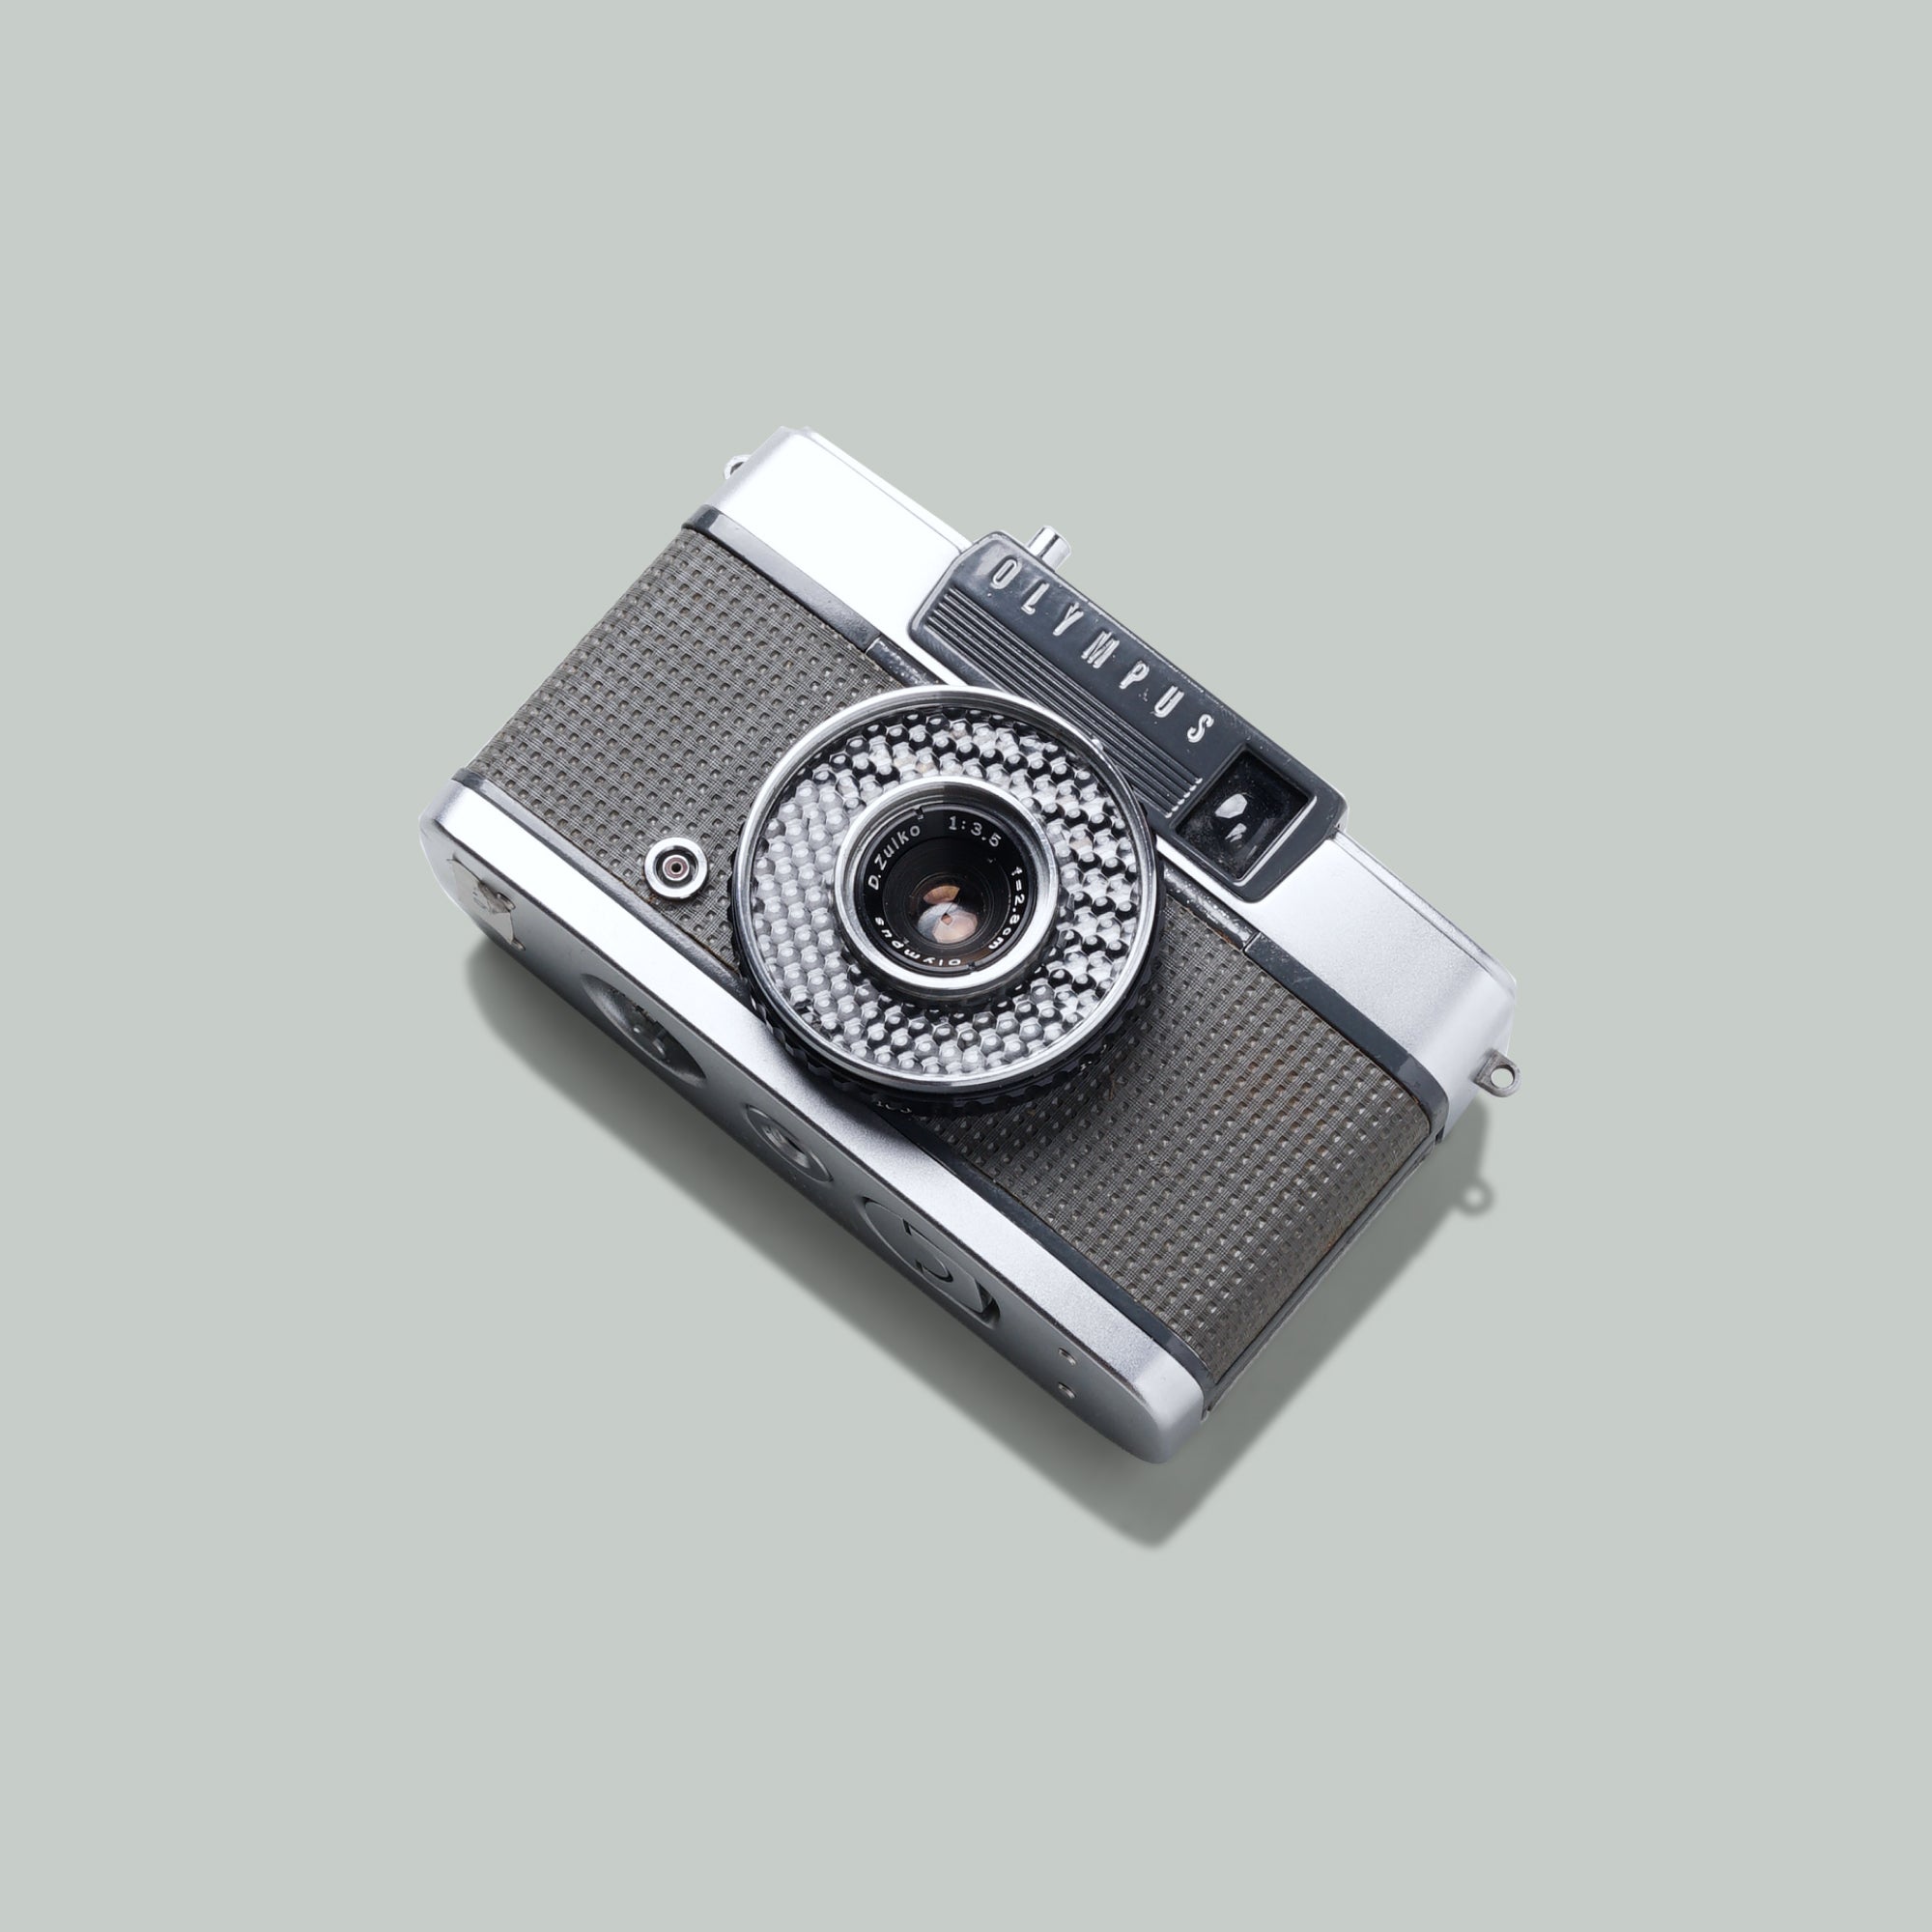 Buy Olympus Pen-EE now at Analogue Amsterdam